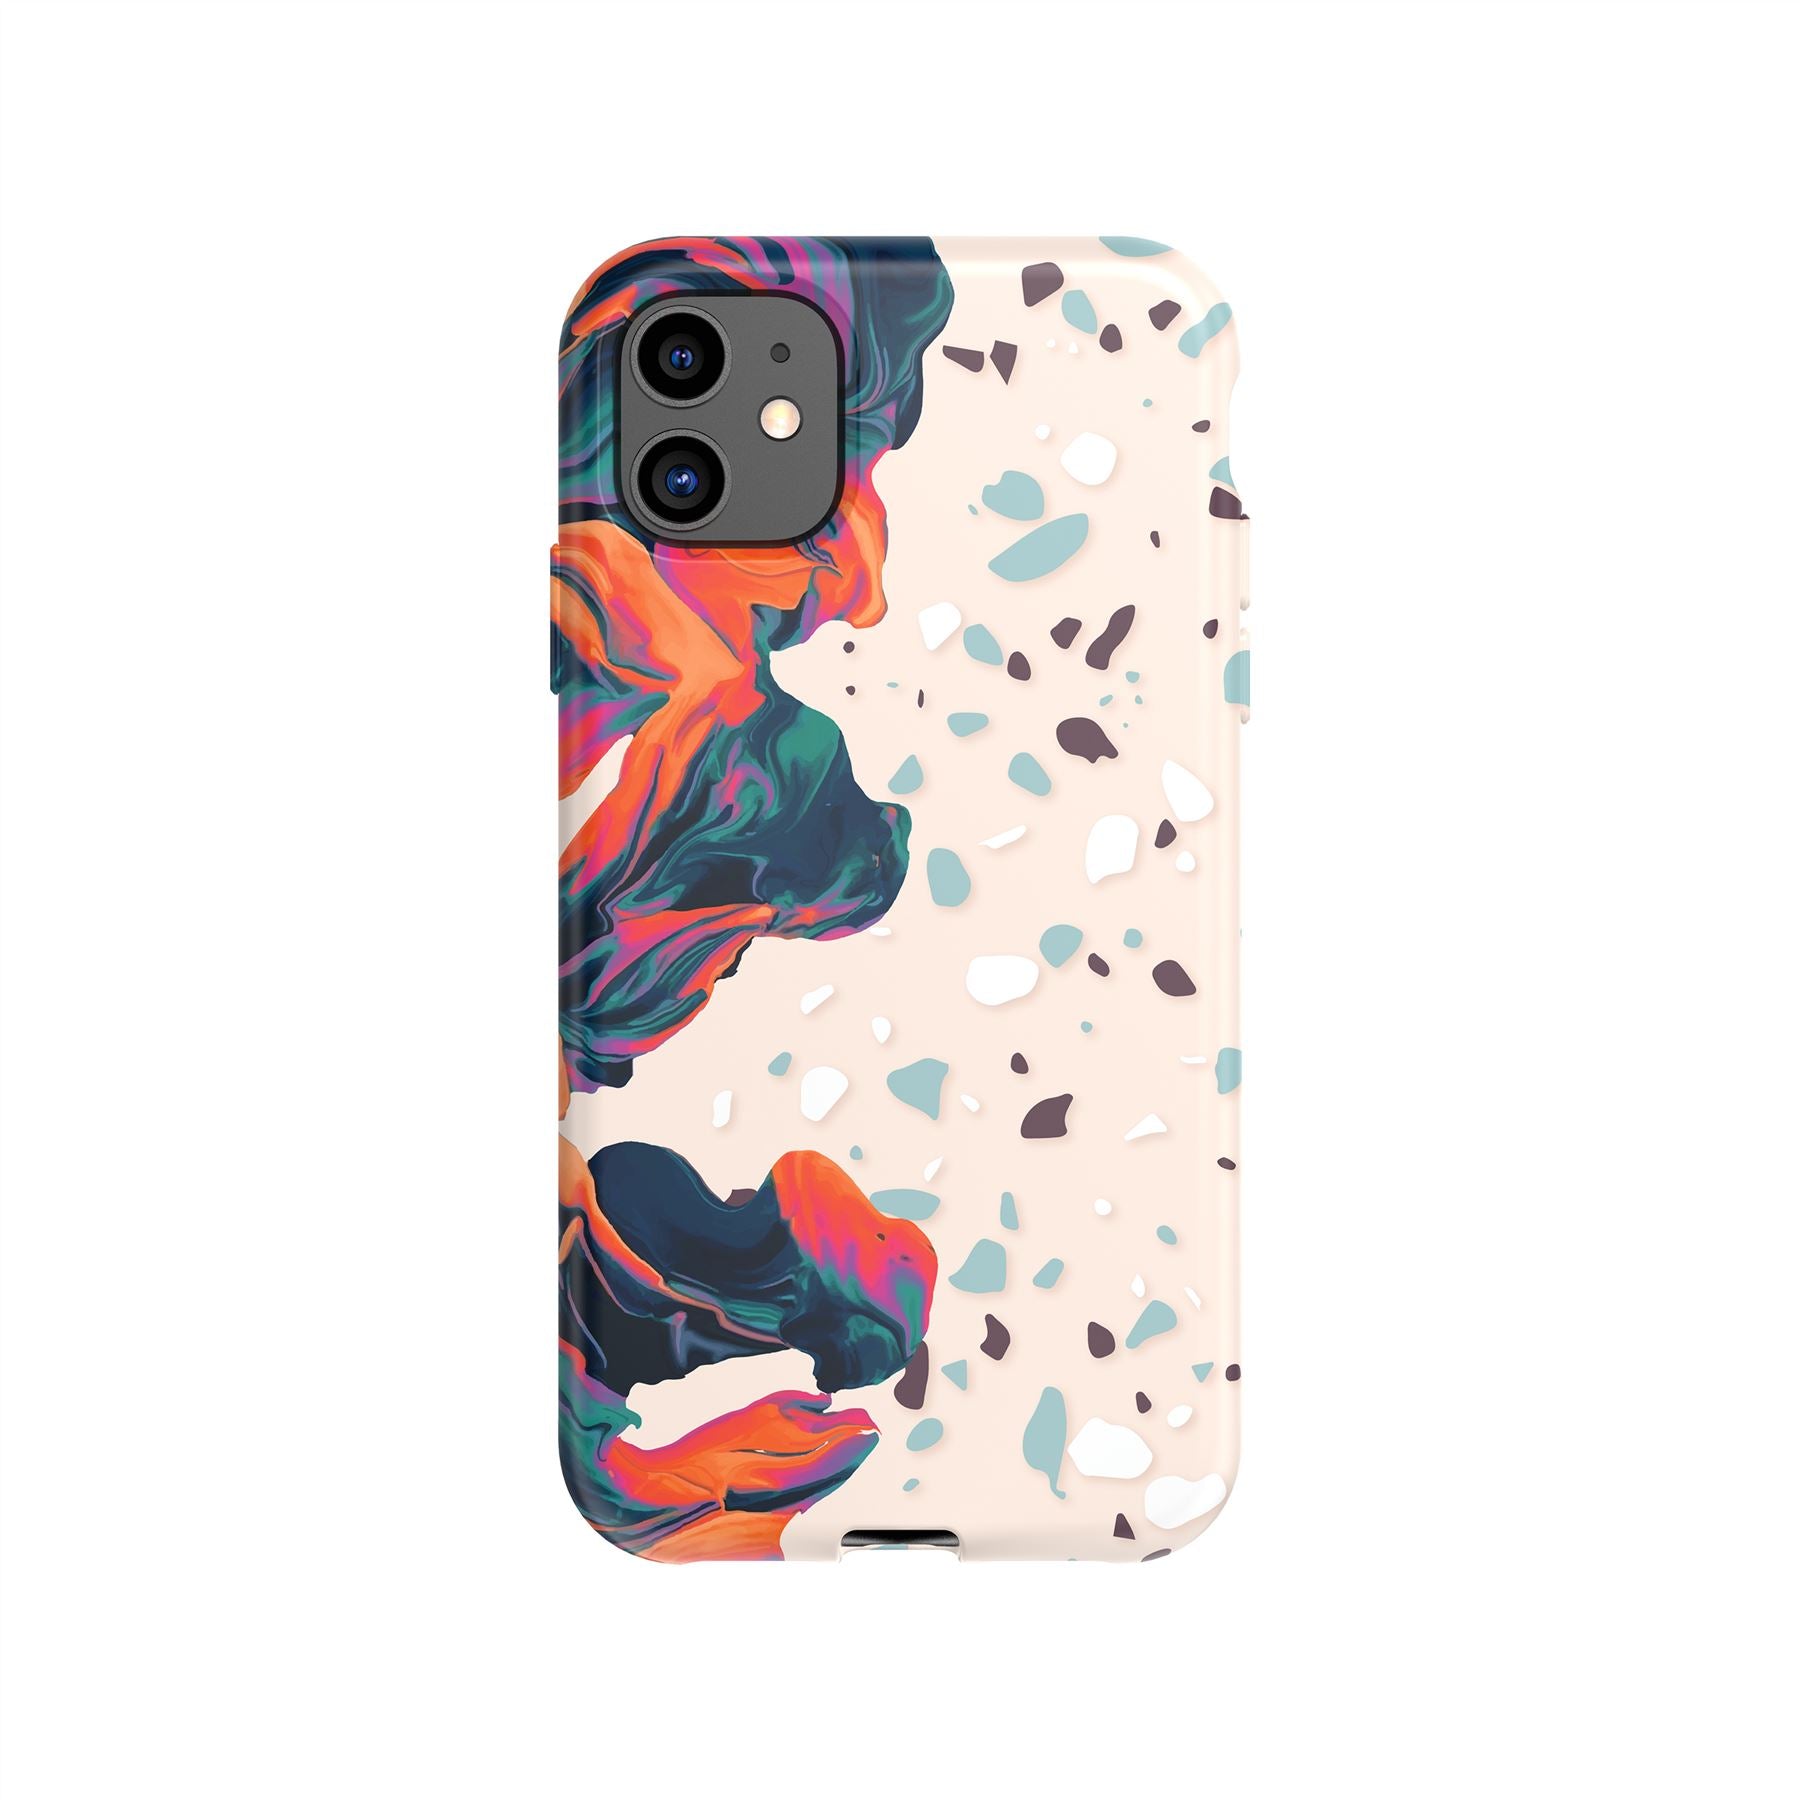 Remix in Motion - Apple iPhone 11 Case - Peach